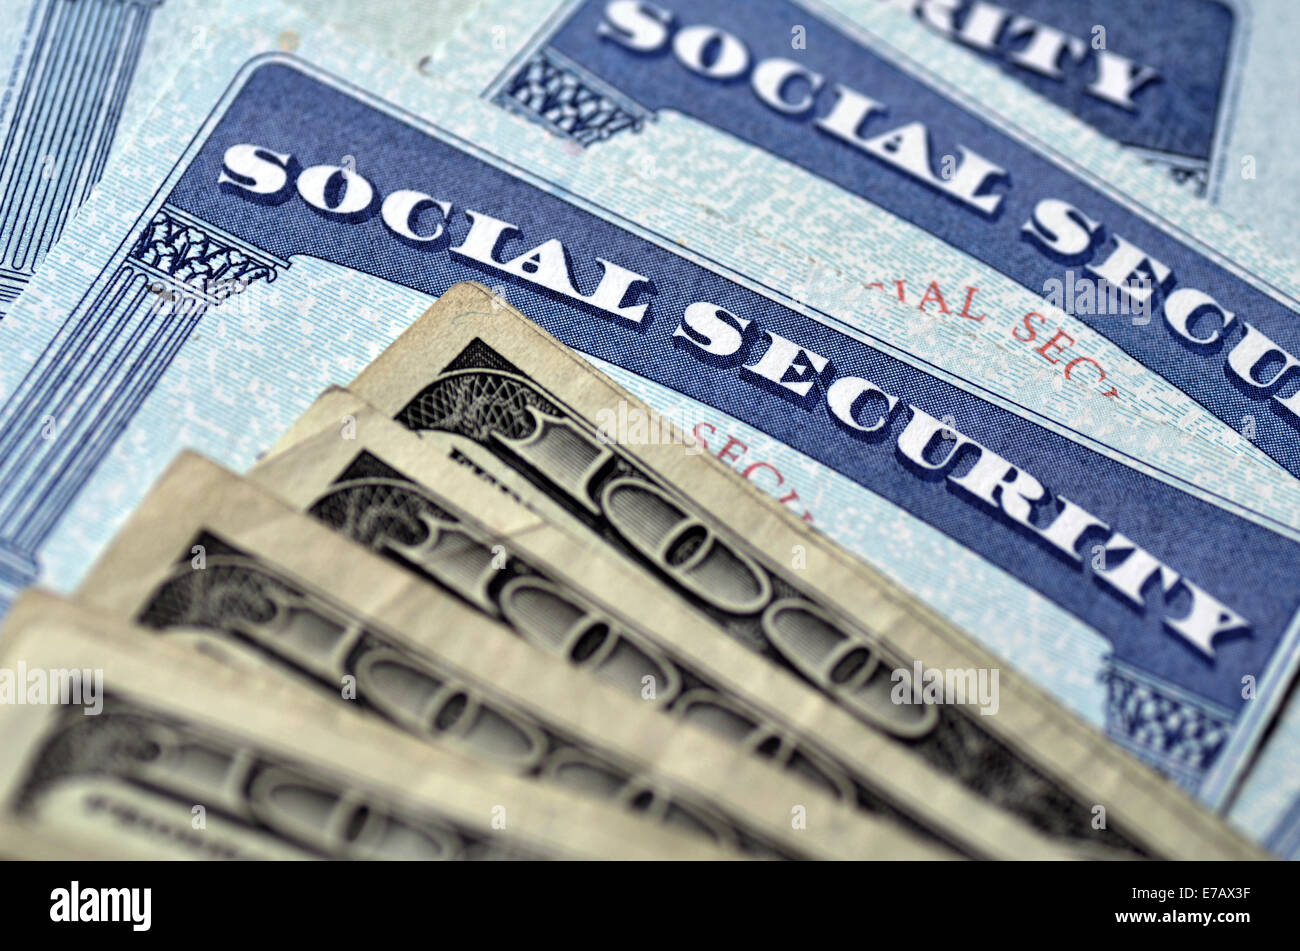 Detail of several Social Security Cards and cash money symbolizing retirement pensions financial safety Stock Photo